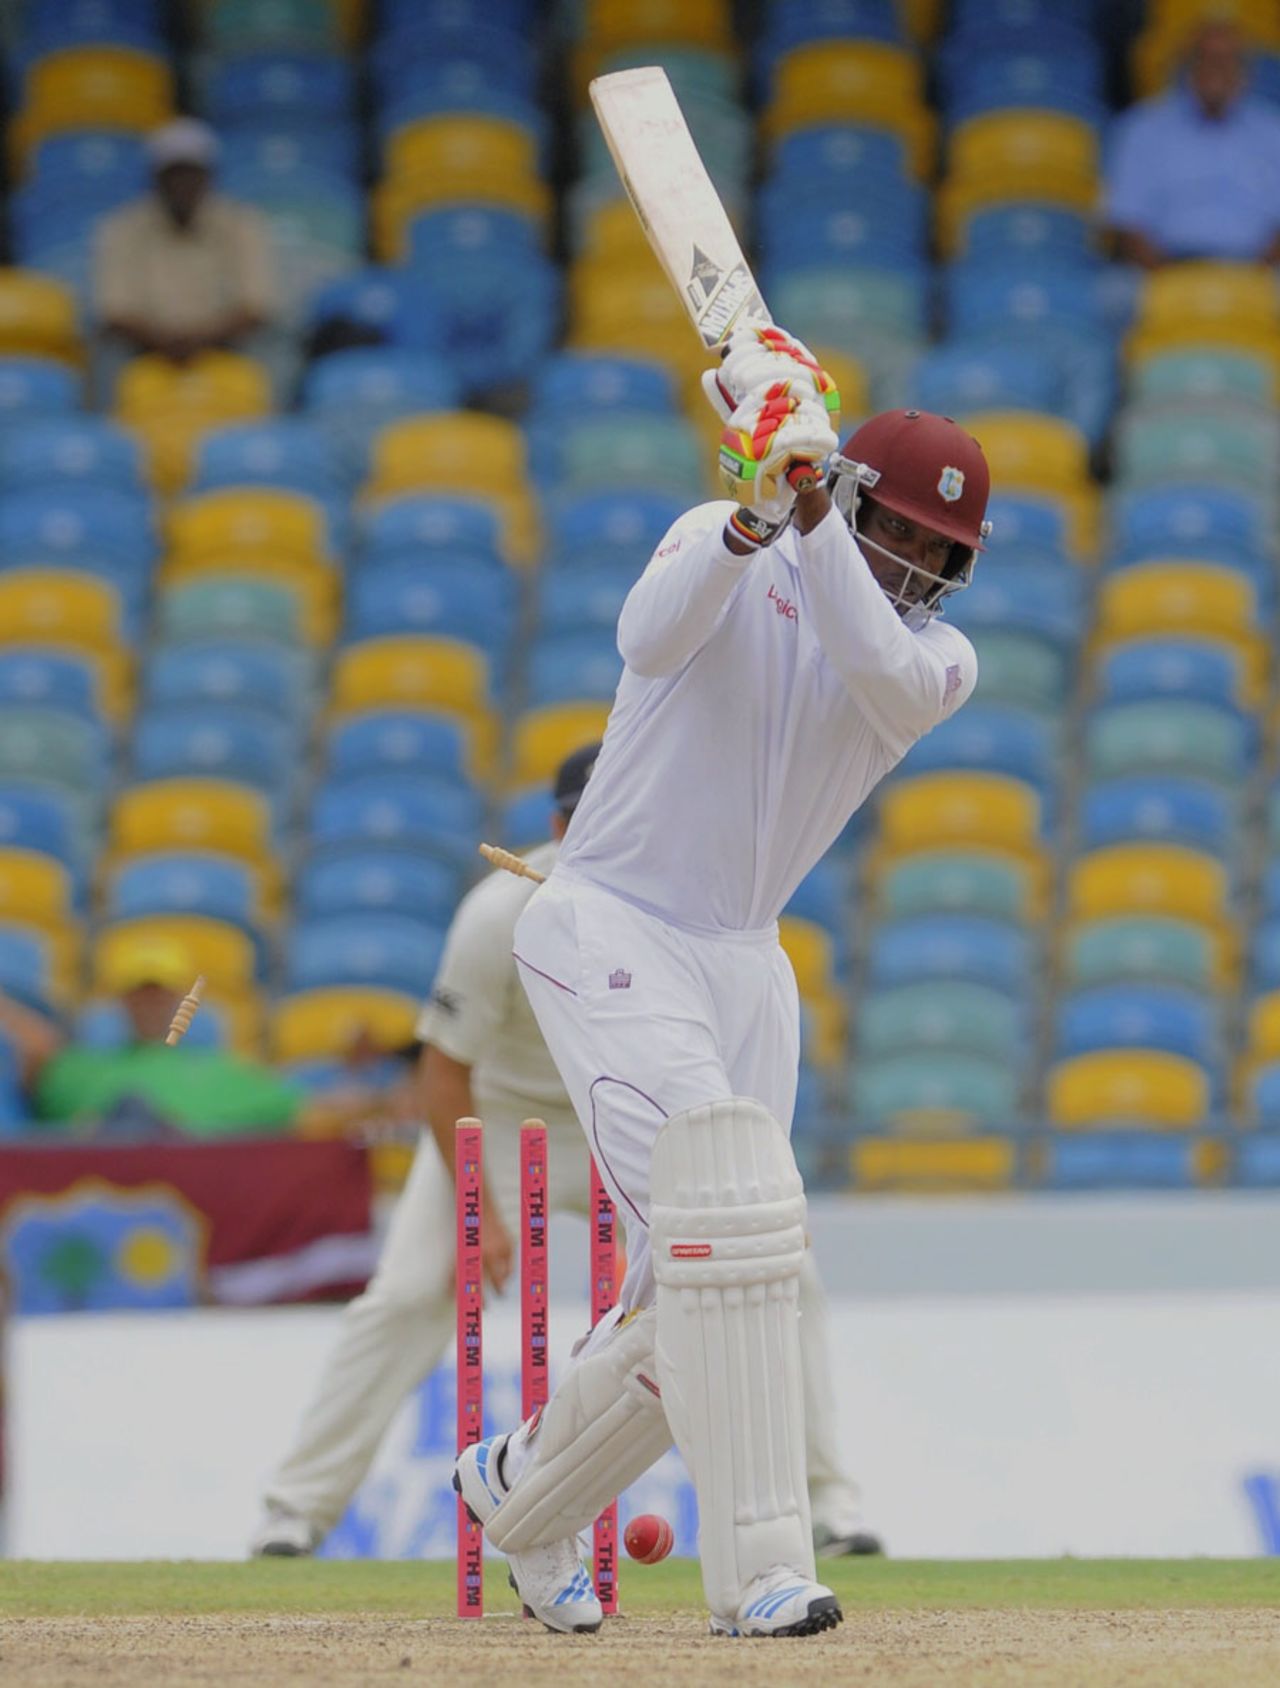 Chris Gayle was bowled for 11, West Indies v New Zealand, 3rd Test, Barbados, 5th day, June 30, 2014